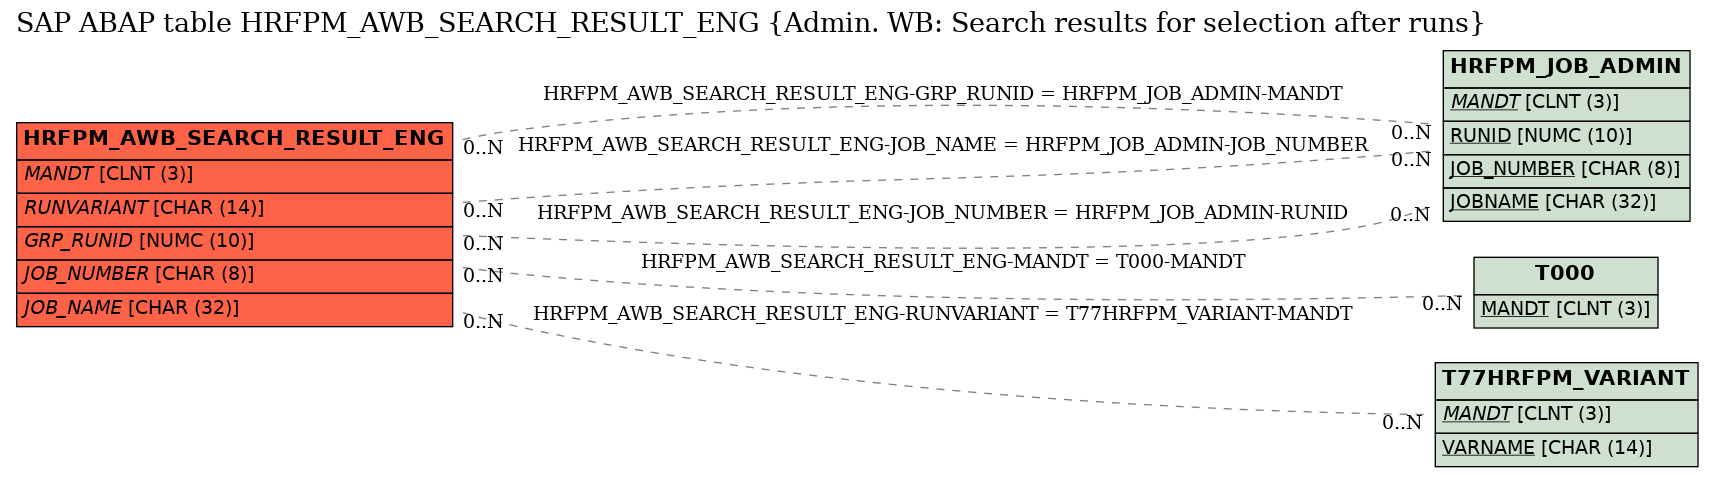 E-R Diagram for table HRFPM_AWB_SEARCH_RESULT_ENG (Admin. WB: Search results for selection after runs)